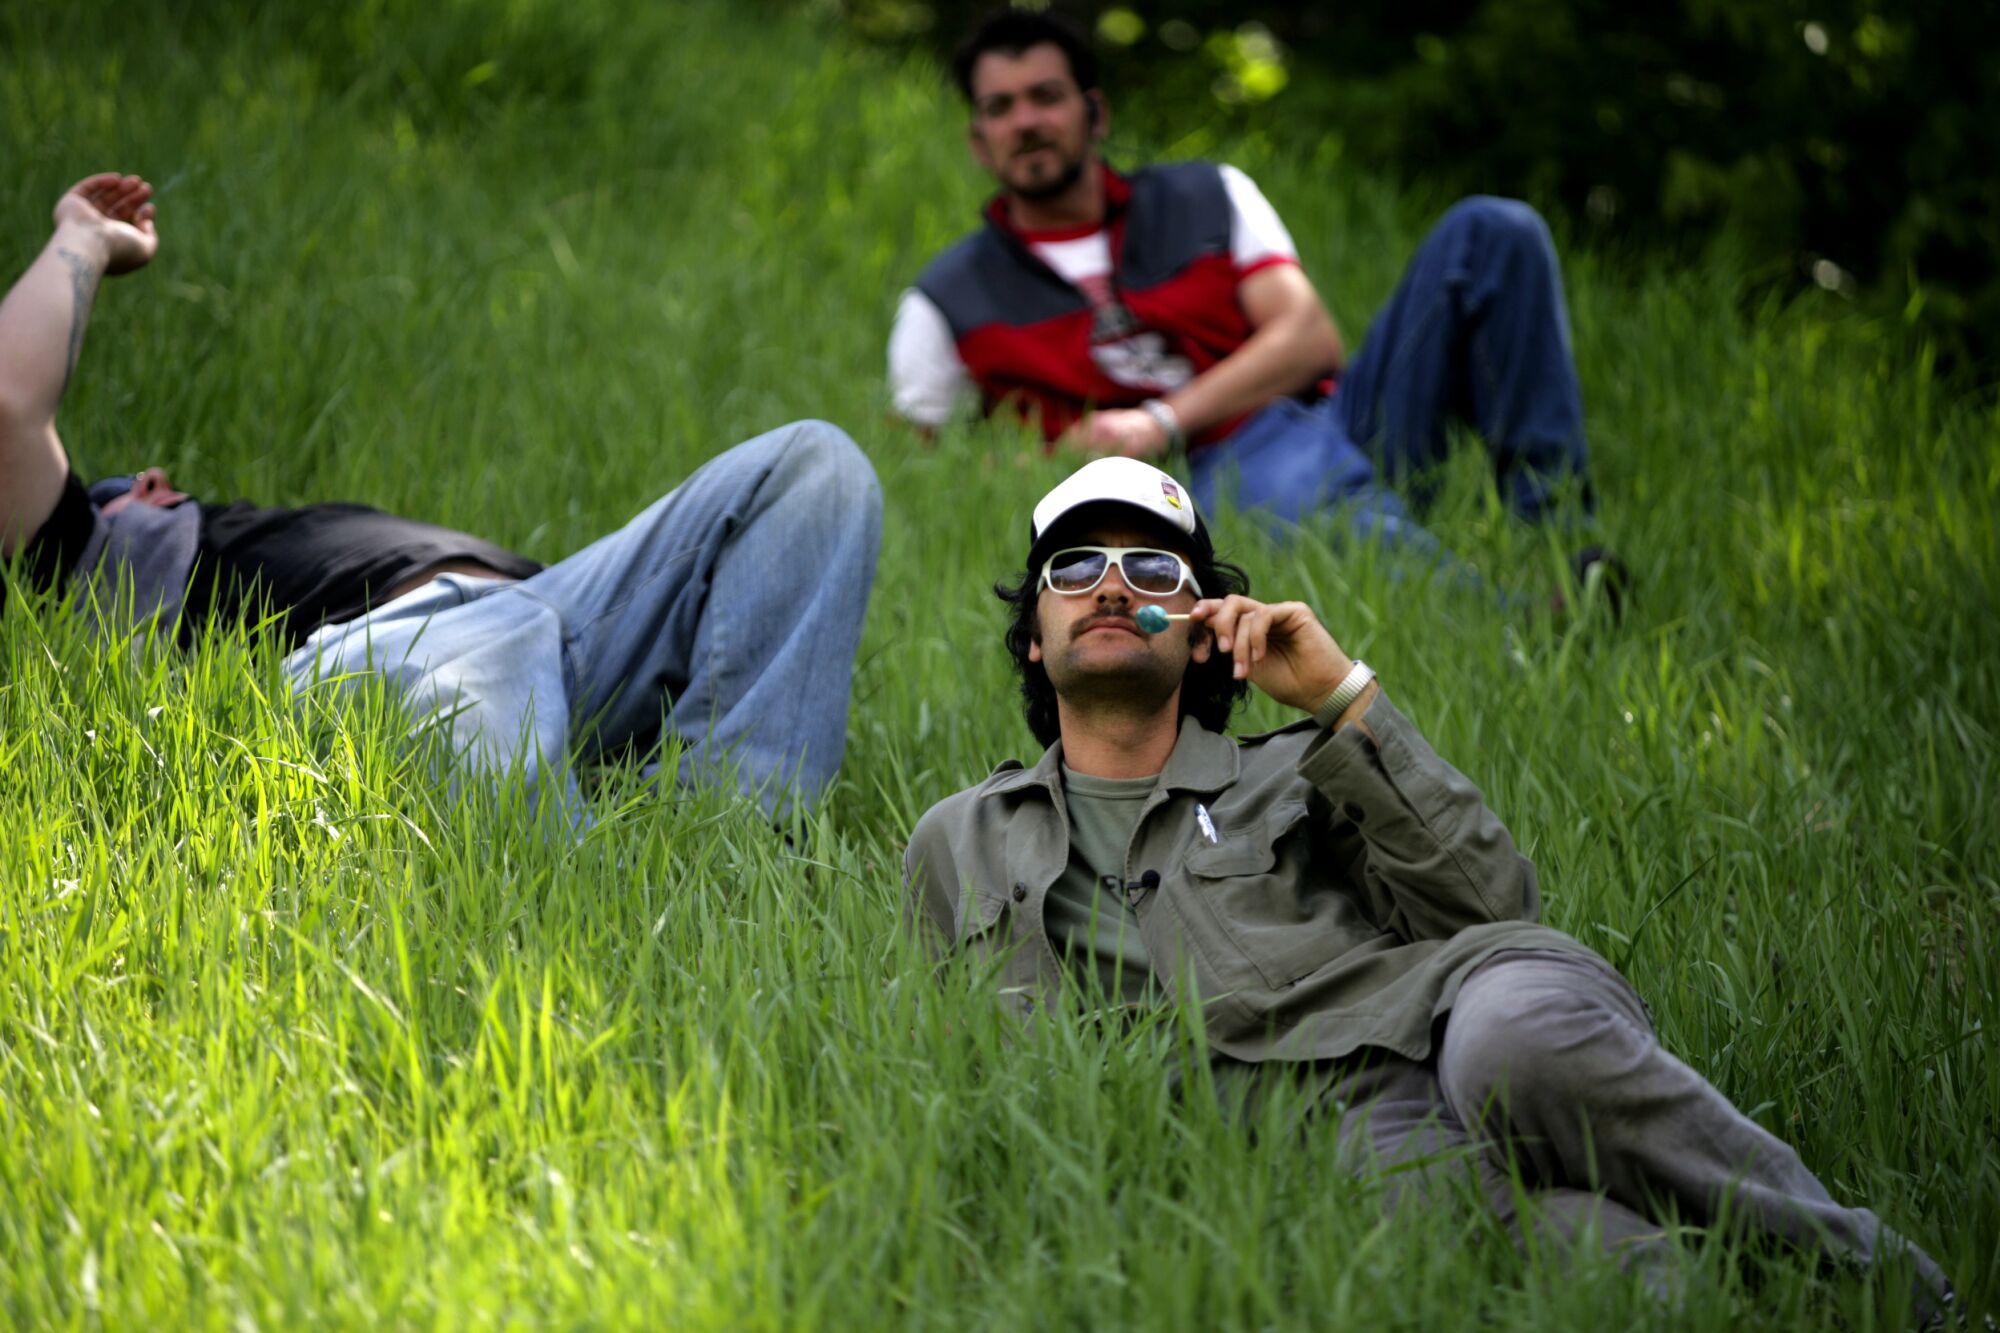 A man with a lollypop lies in the grass with two other men in the background